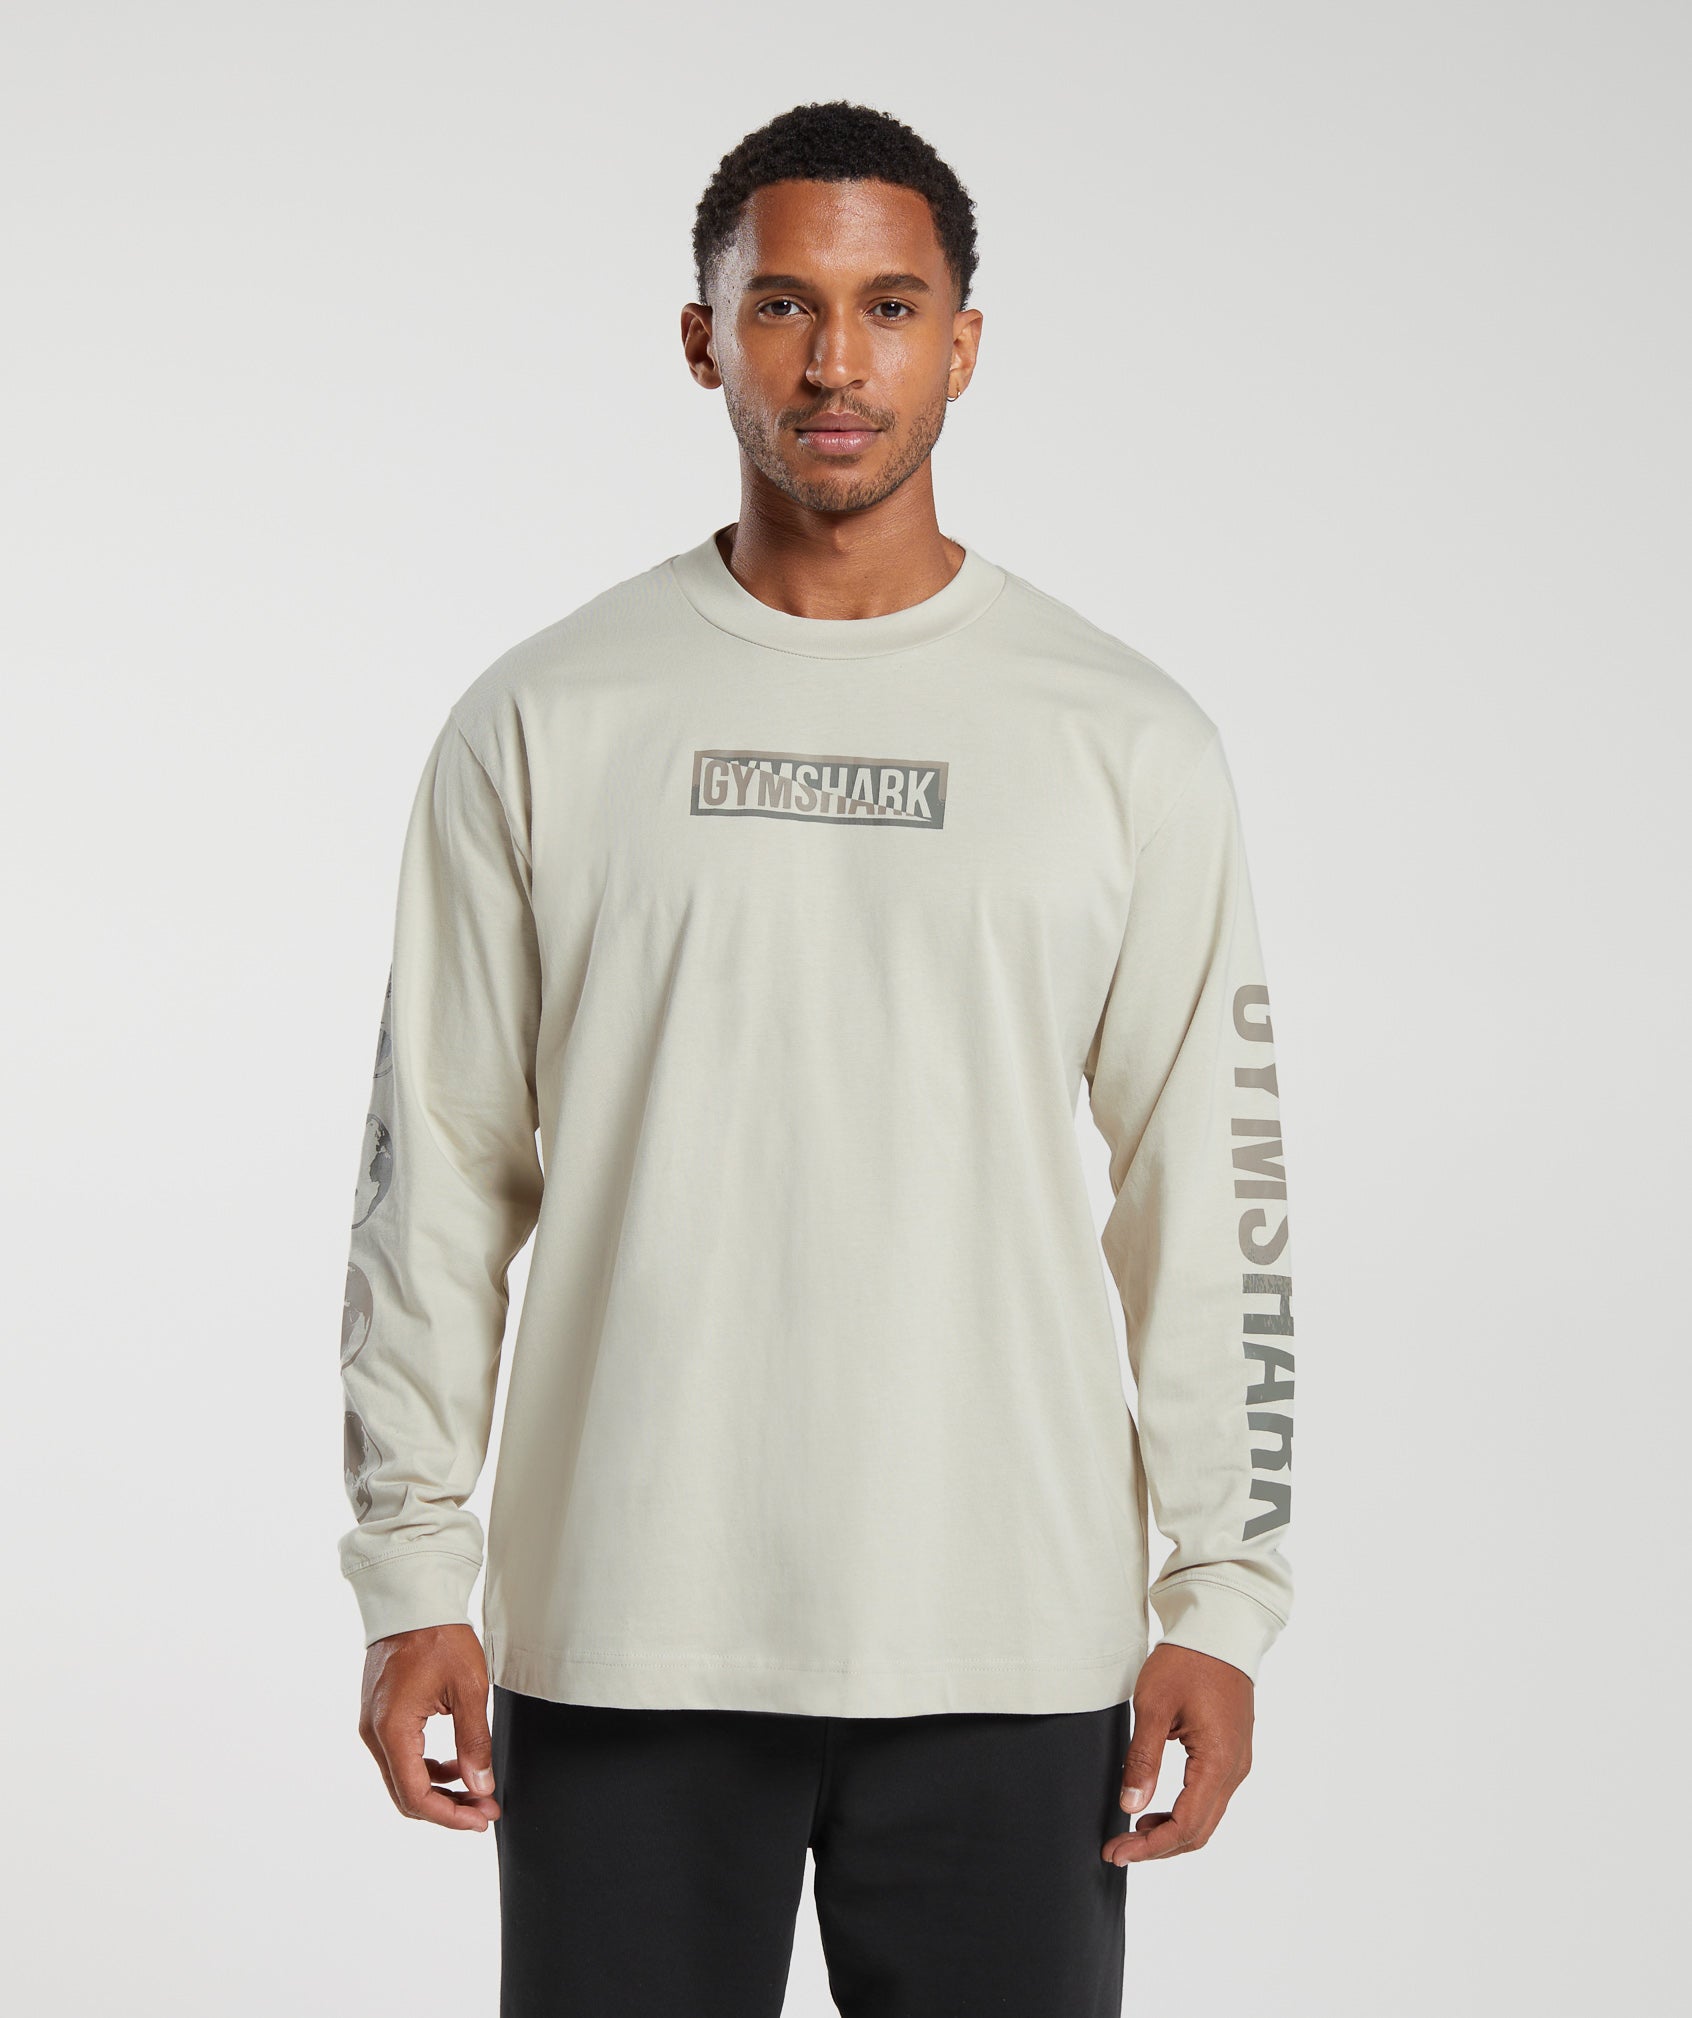 Gymshark Clothing (100+ products) compare price now »